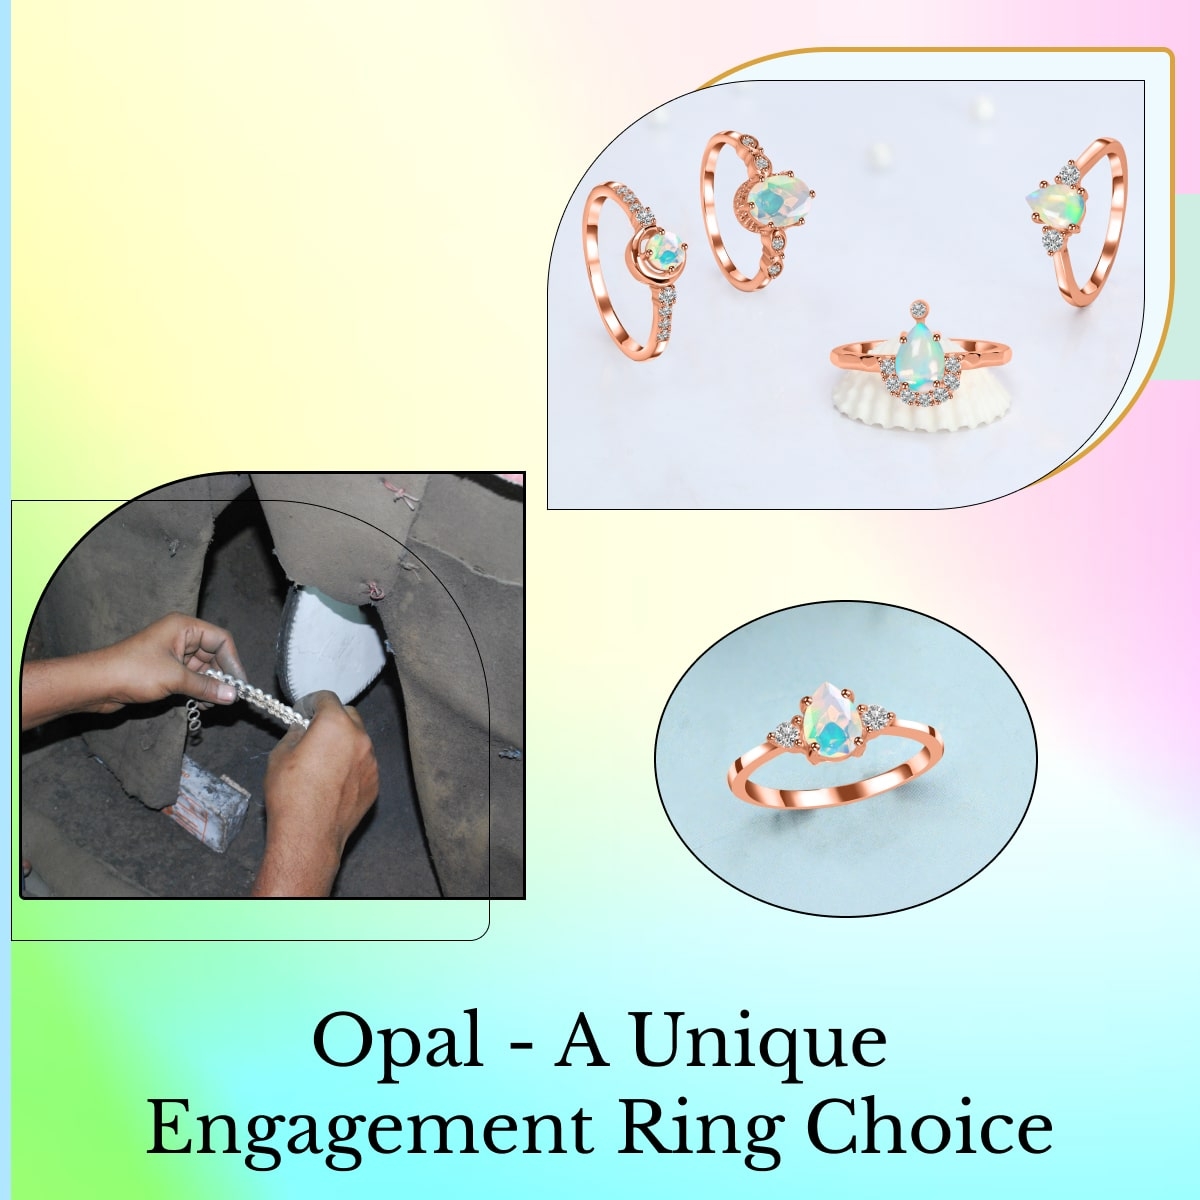 Using Opal in an Engagement Ring